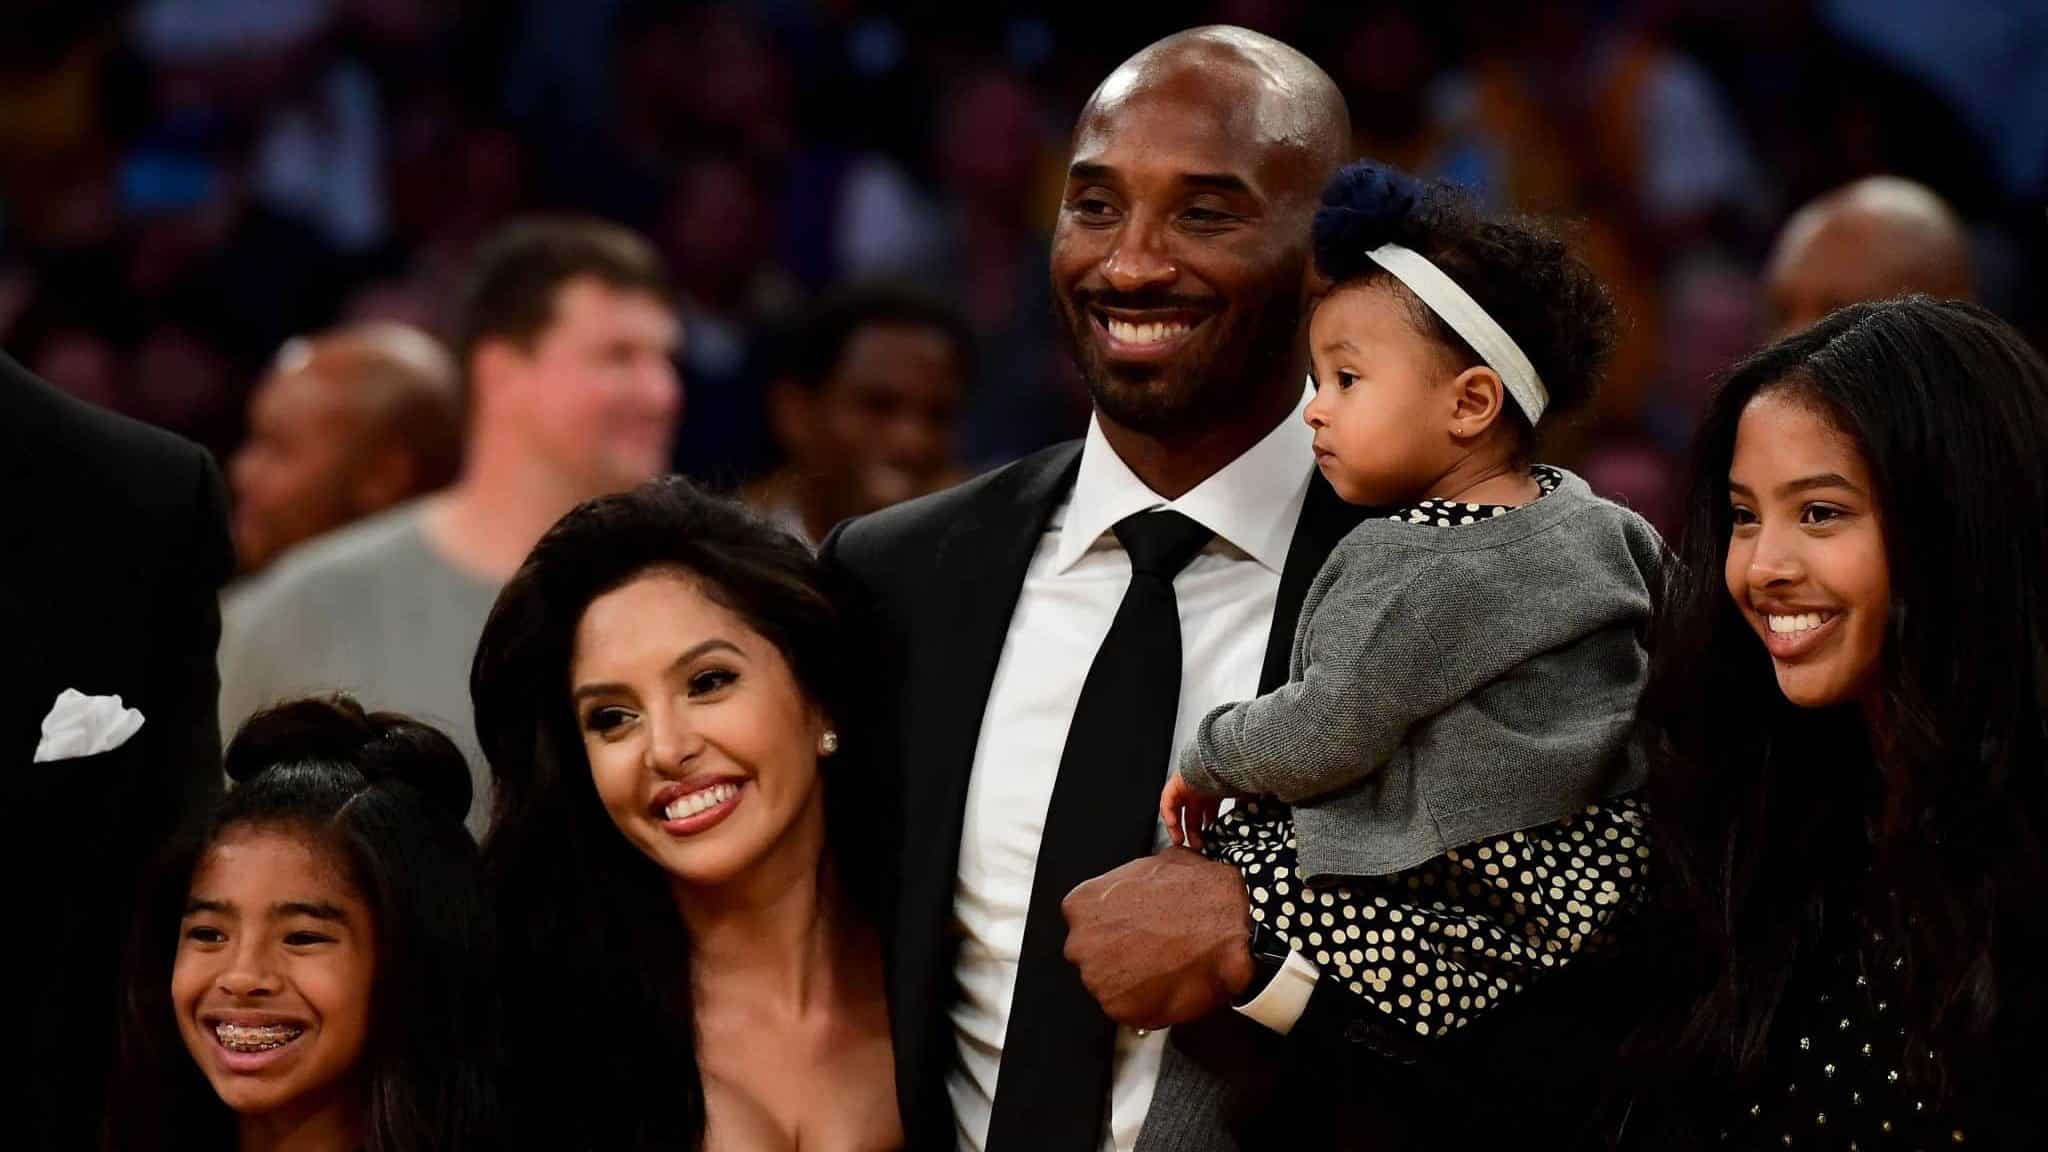 LOS ANGELES, CA - DECEMBER 18: Kobe Bryant poses with his family at halftime after both his #8 and #24 Los Angeles Lakers jerseys are retired at Staples Center on December 18, 2017 in Los Angeles, California.